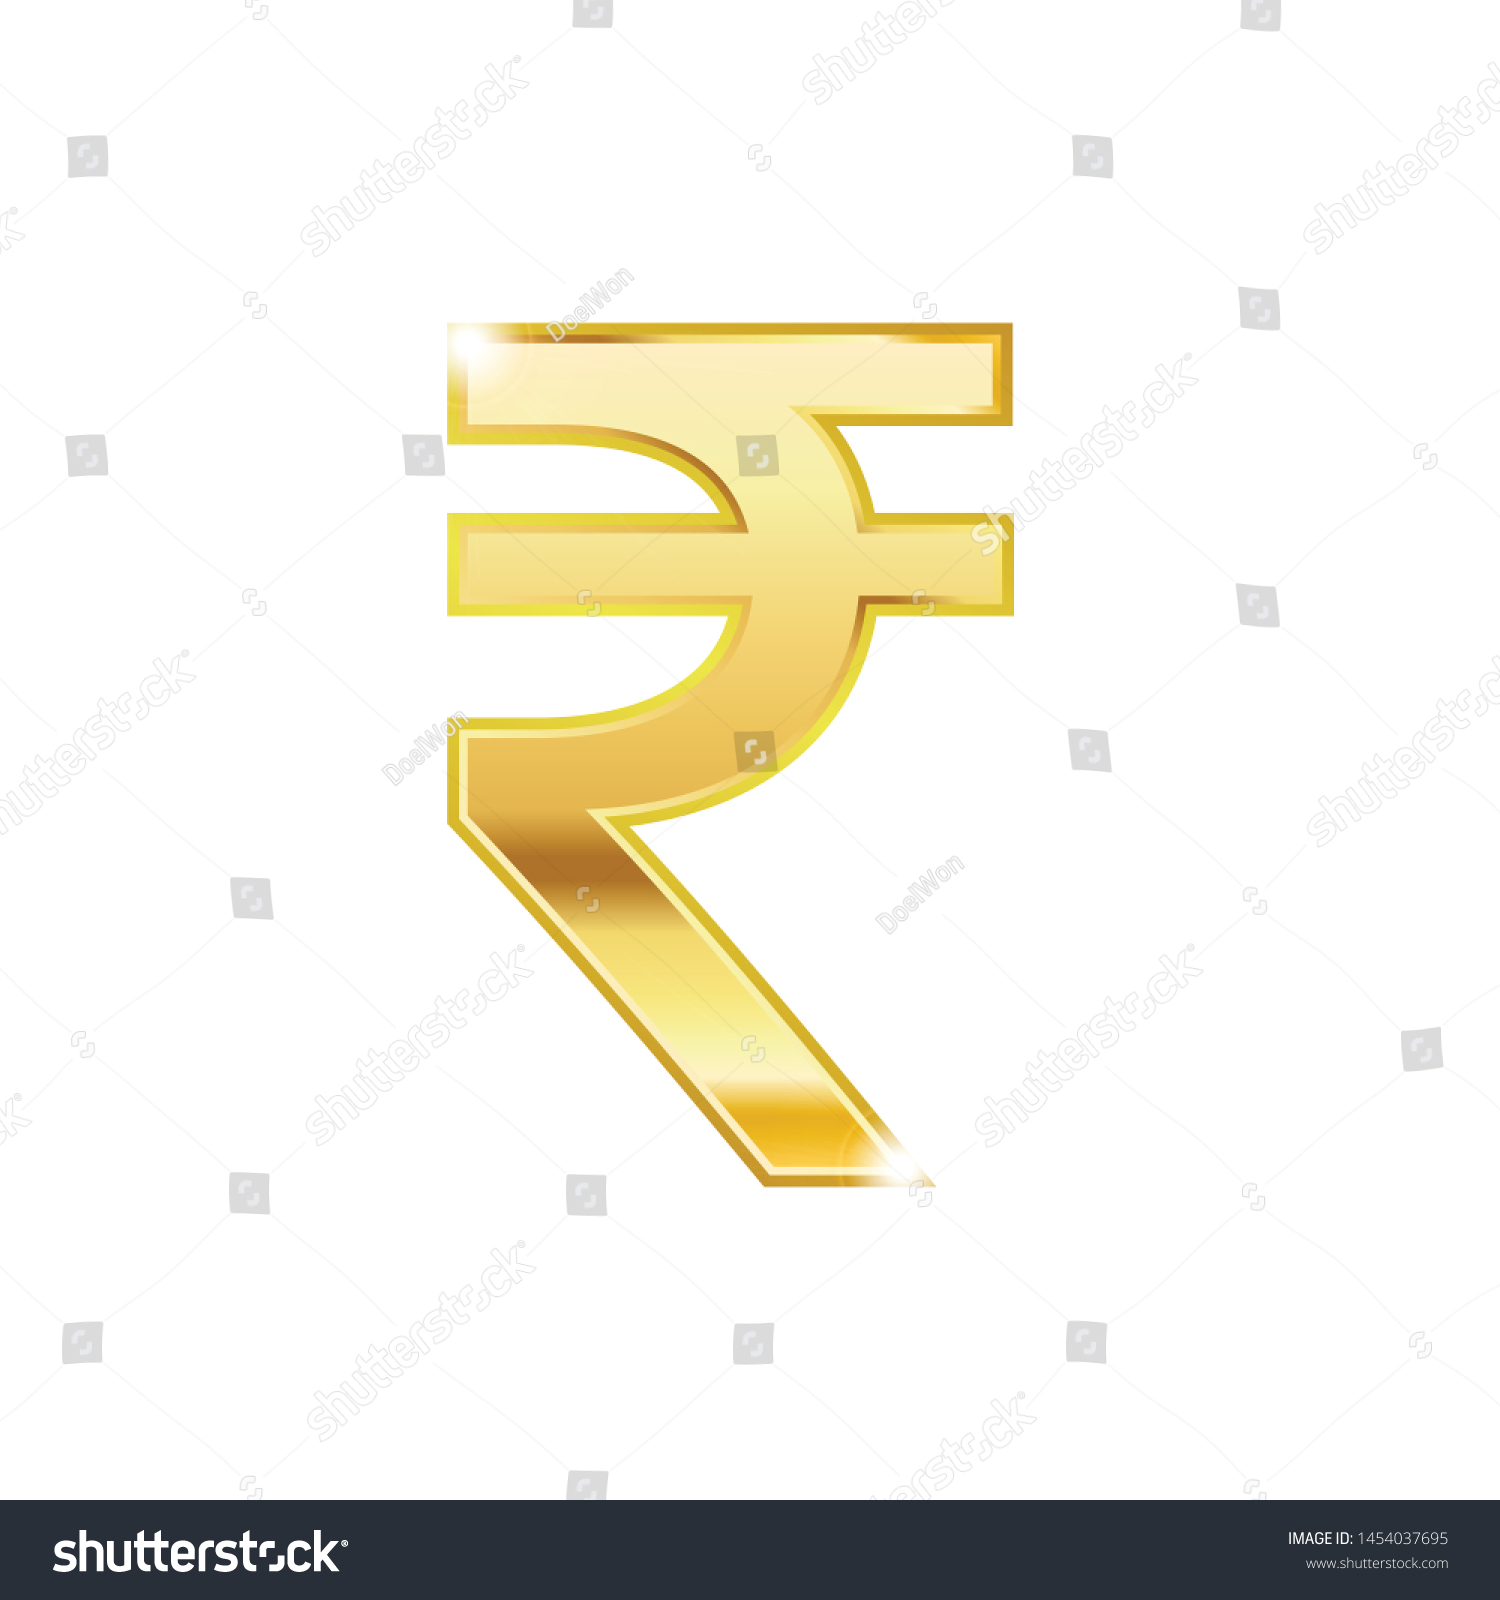 SVG of Golden Rupee symbol isolated web vector icon. Rupee trendy 3d style vector icon. Golden Rupee currency sign svg